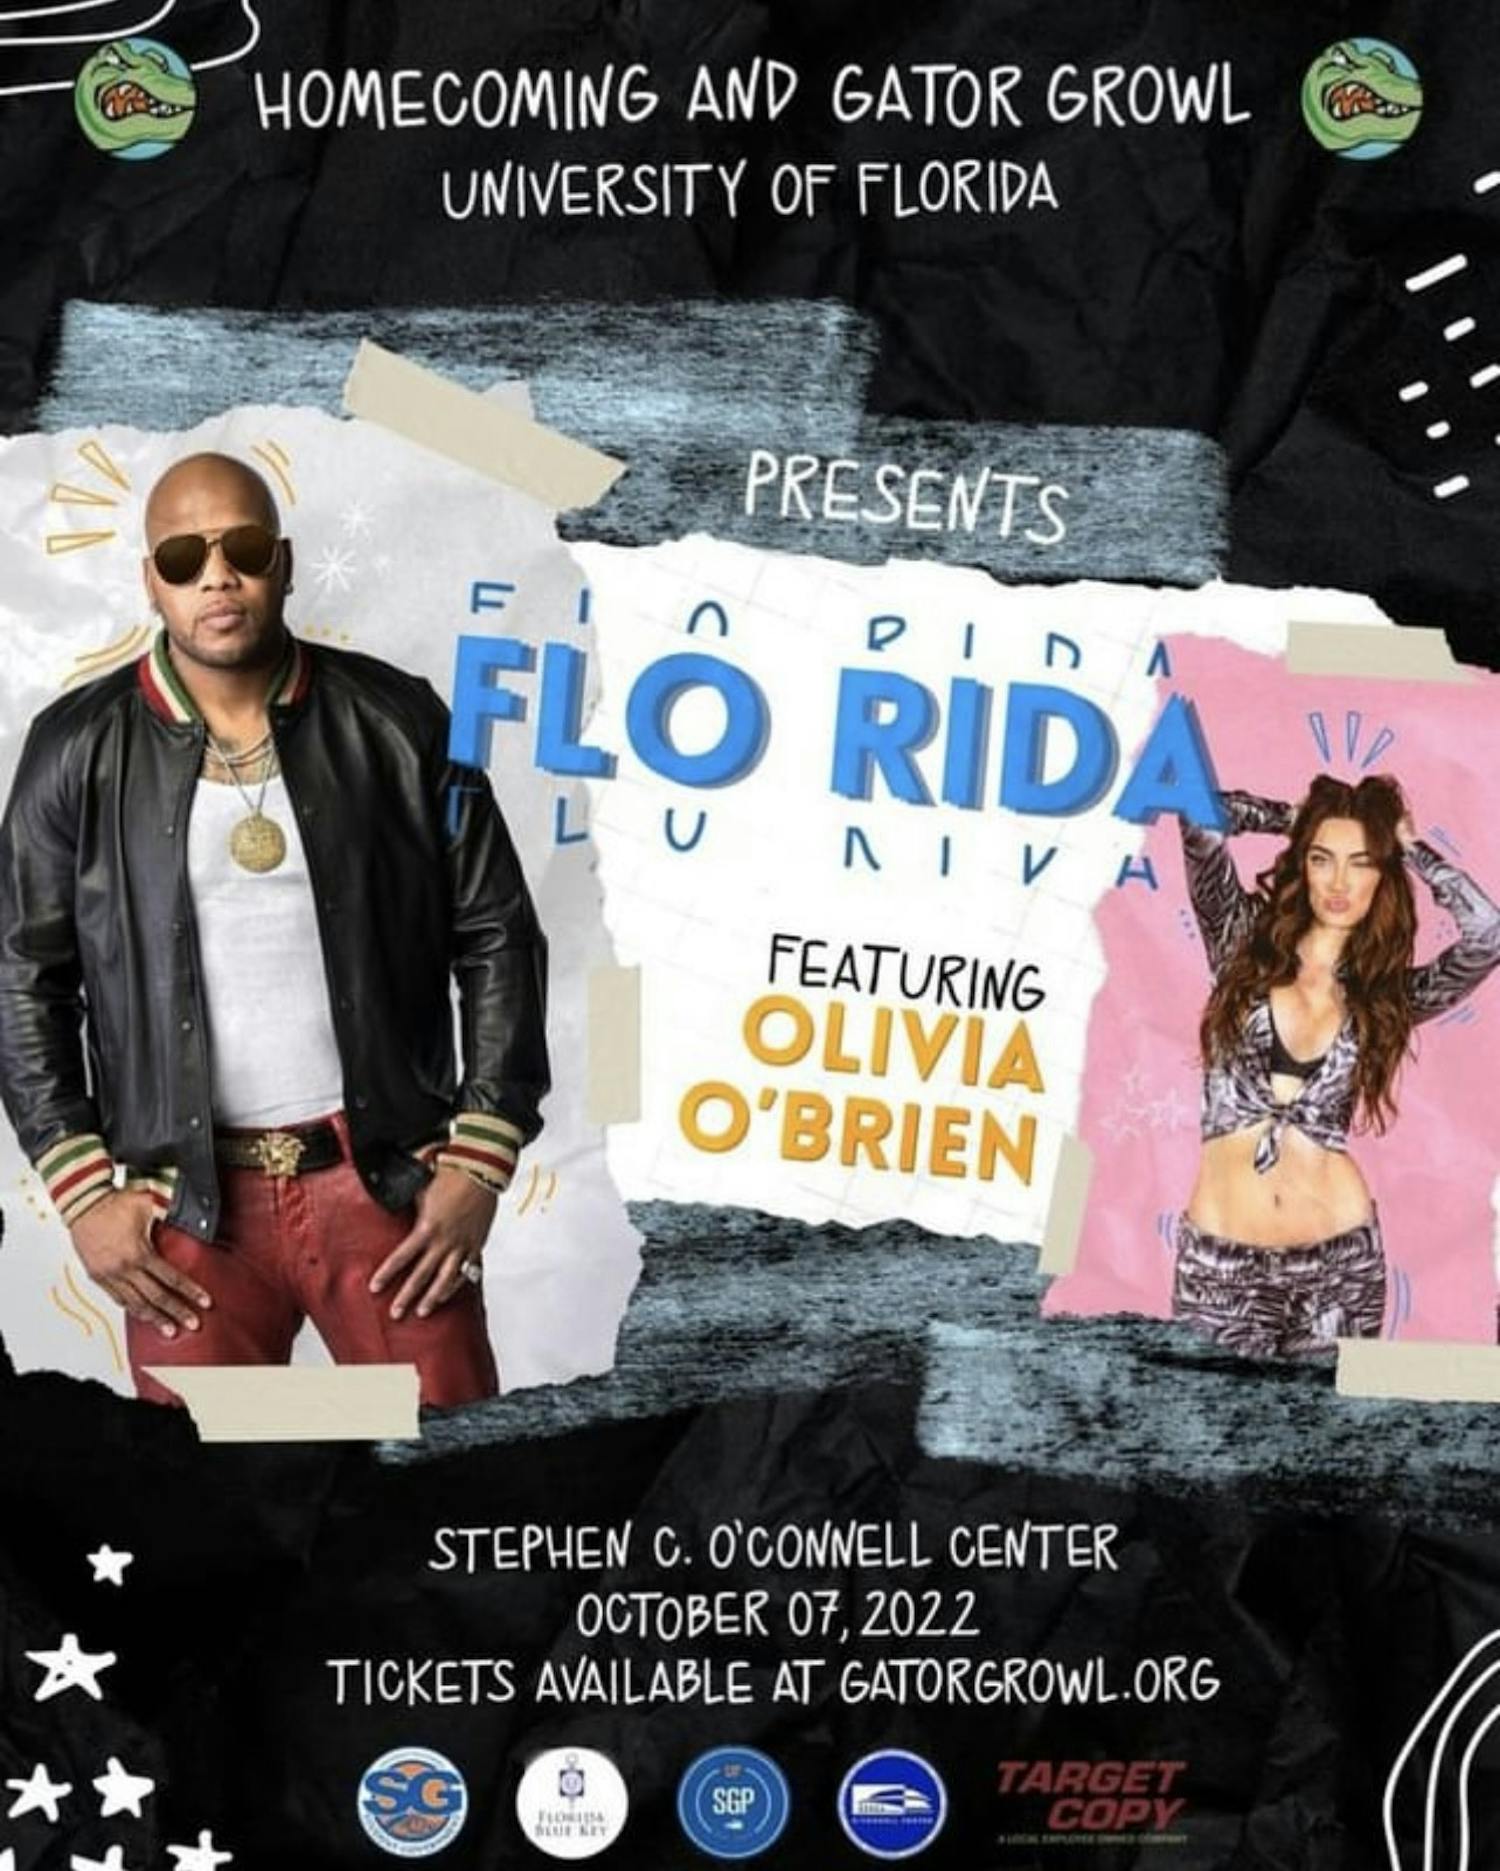 Screenshot of Flo Rida announcement on UF Homecoming and Gator Growl&#x27;s Instagram page.